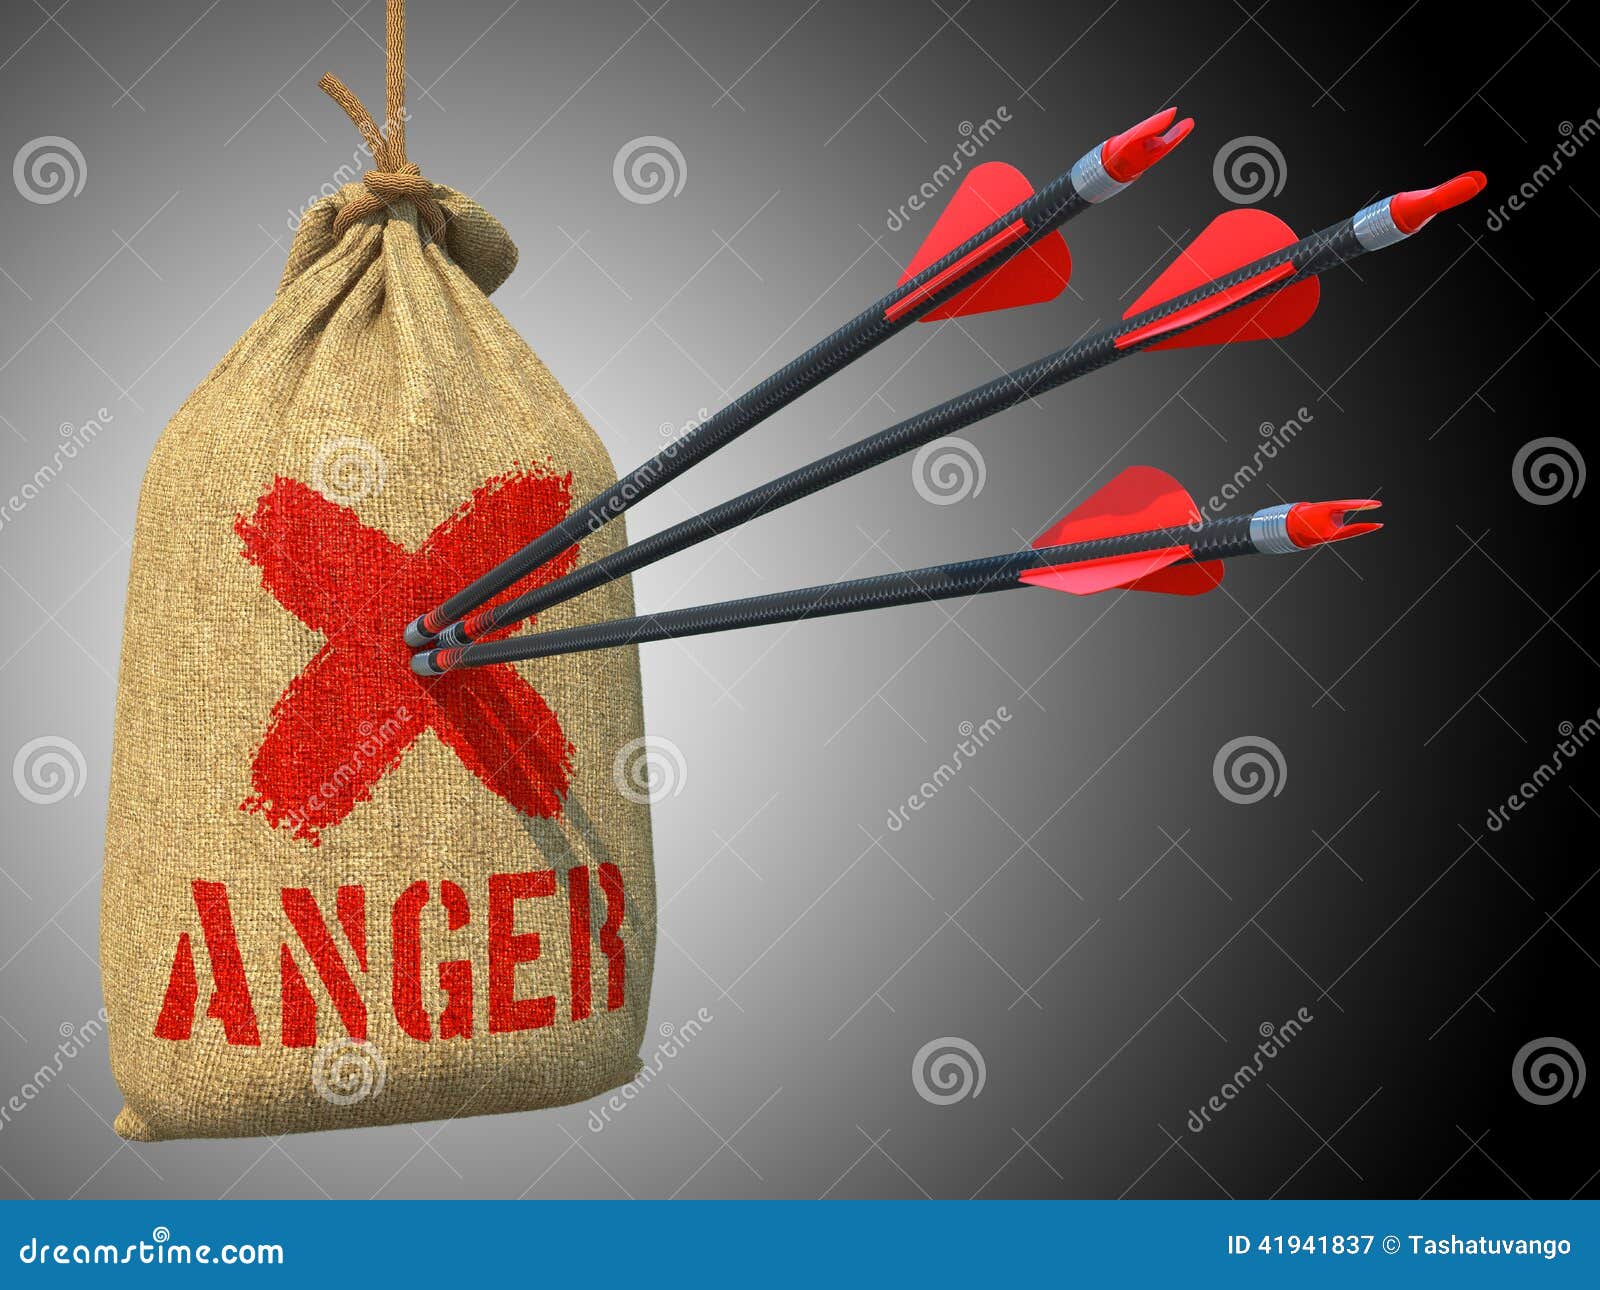 anger - arrows hit in red mark target.